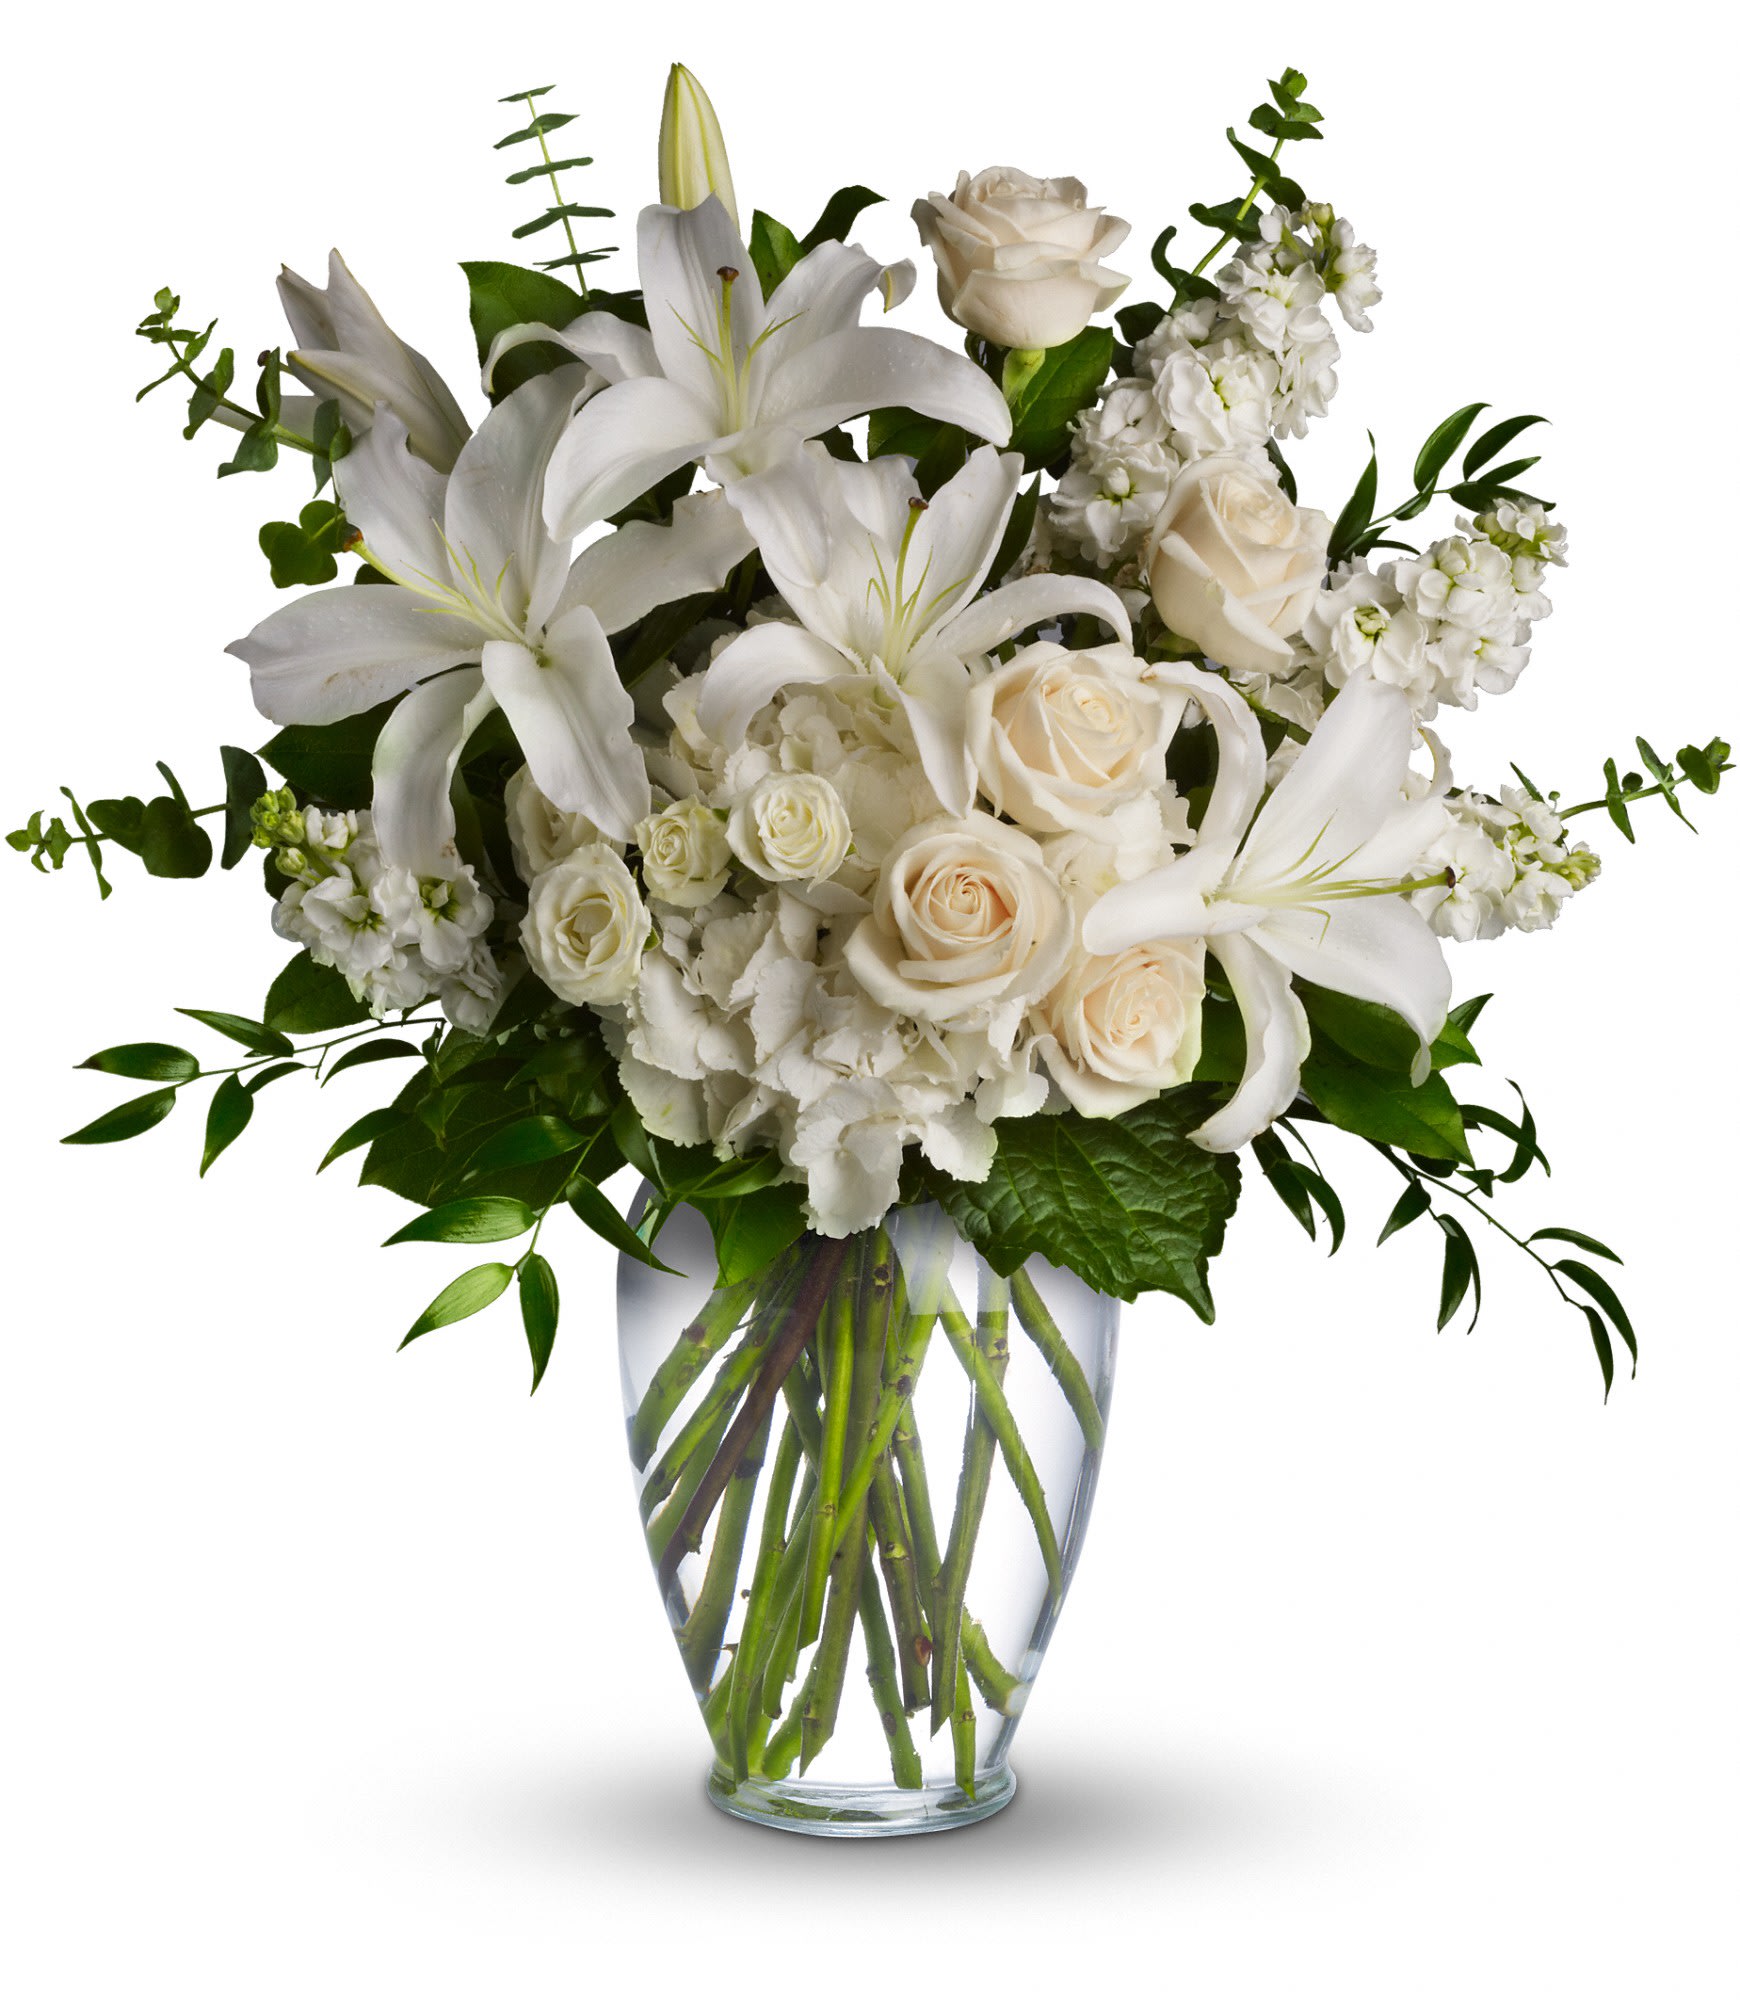 Dreams From the Heart  - A lovely bouquet to soothe and comfort, a variety of white and peach blossoms sends your hope and strength. Beautiful flowers such as white hydrangea, spray roses and stock, peach roses, eucalyptus and more fill a tall glass vase. Approximately 24&quot; W x 24 1/2&quot;  PLEASE NOTE: Florist reserves the right to make modifications to the design based on seasonality and accessibility of blooms and vases. Any modifications made will honor the palette, intent, and feeling of the pictured design. Contact floral designer directly with any specifications or concerns.